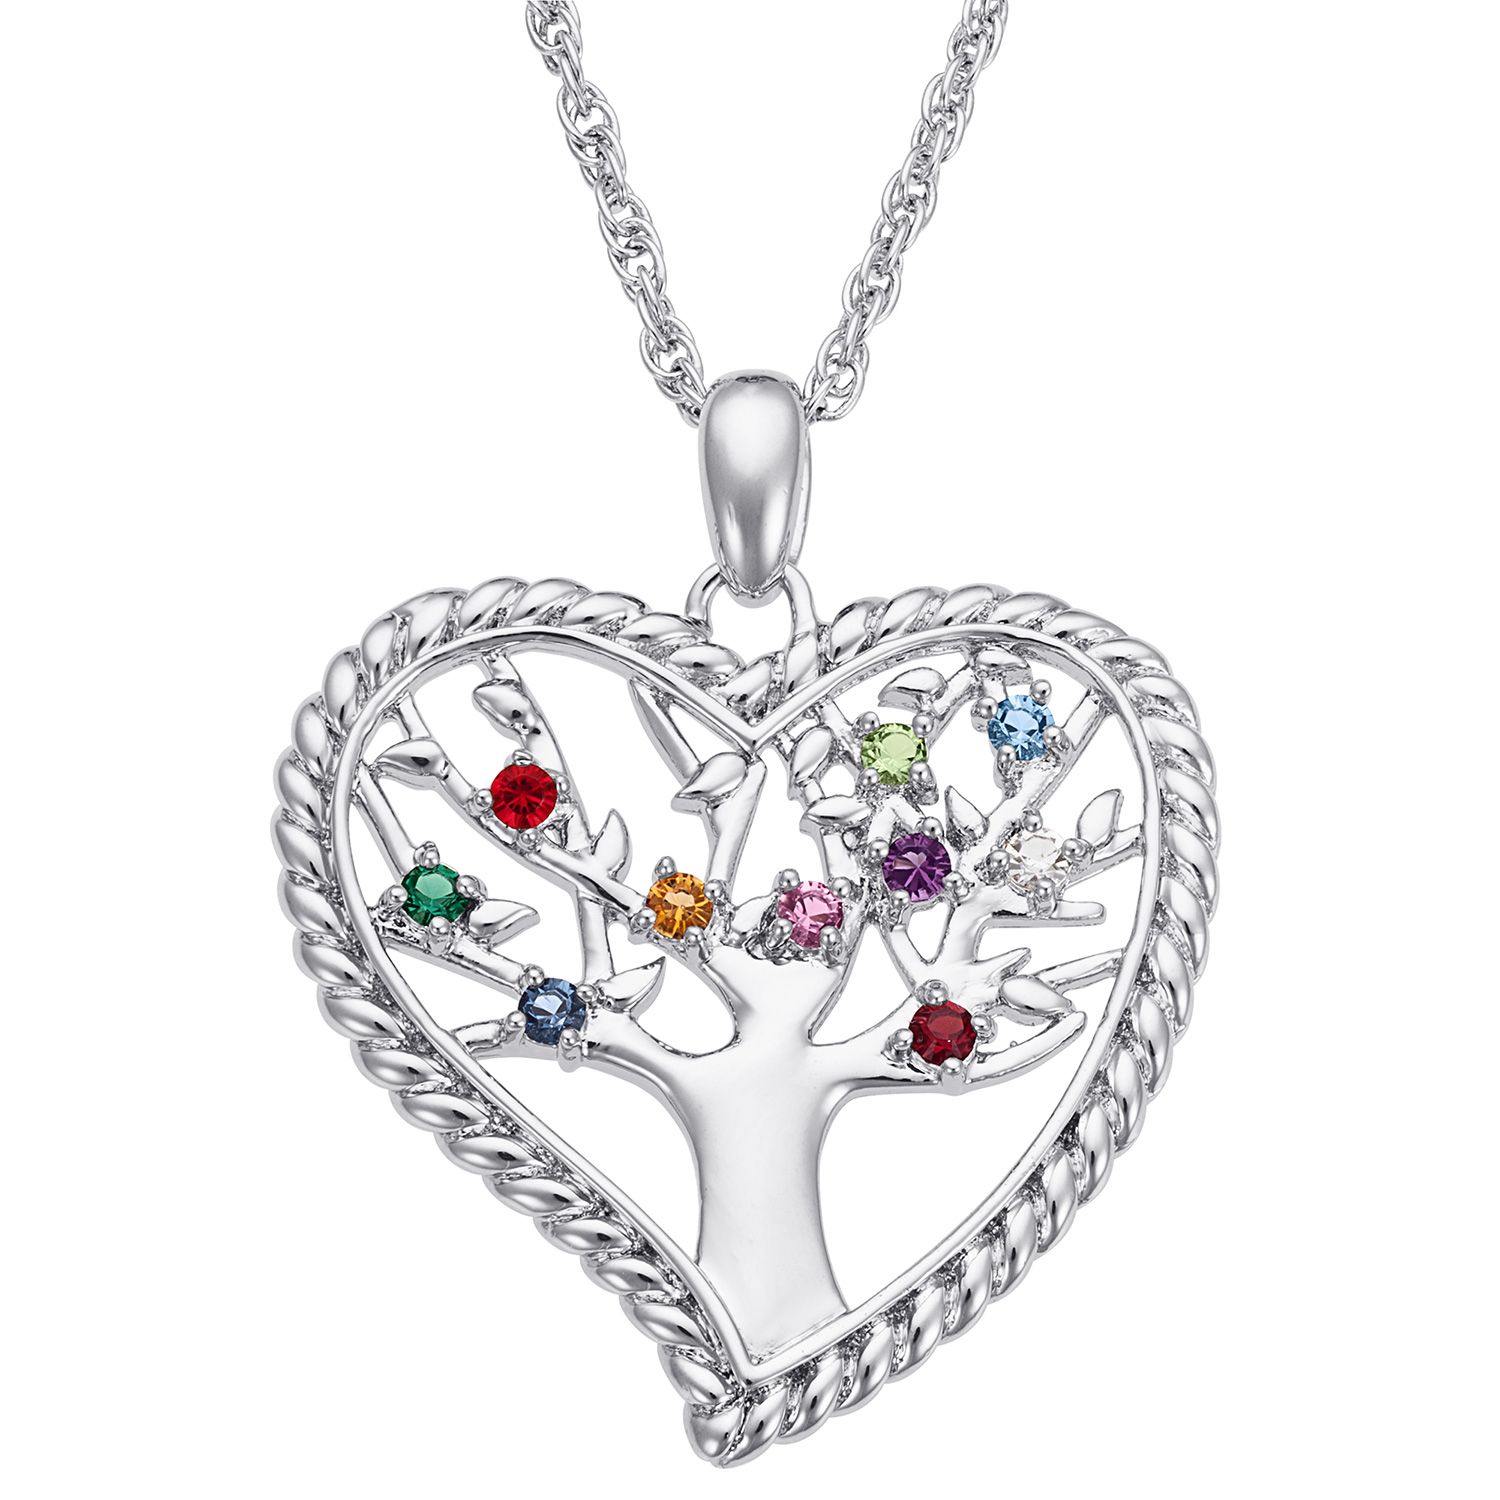 Sterling Silver Family Heart Birthstone Tree Pendant Pertaining To Recent Family Tree Heart Pendant Necklaces (View 2 of 25)